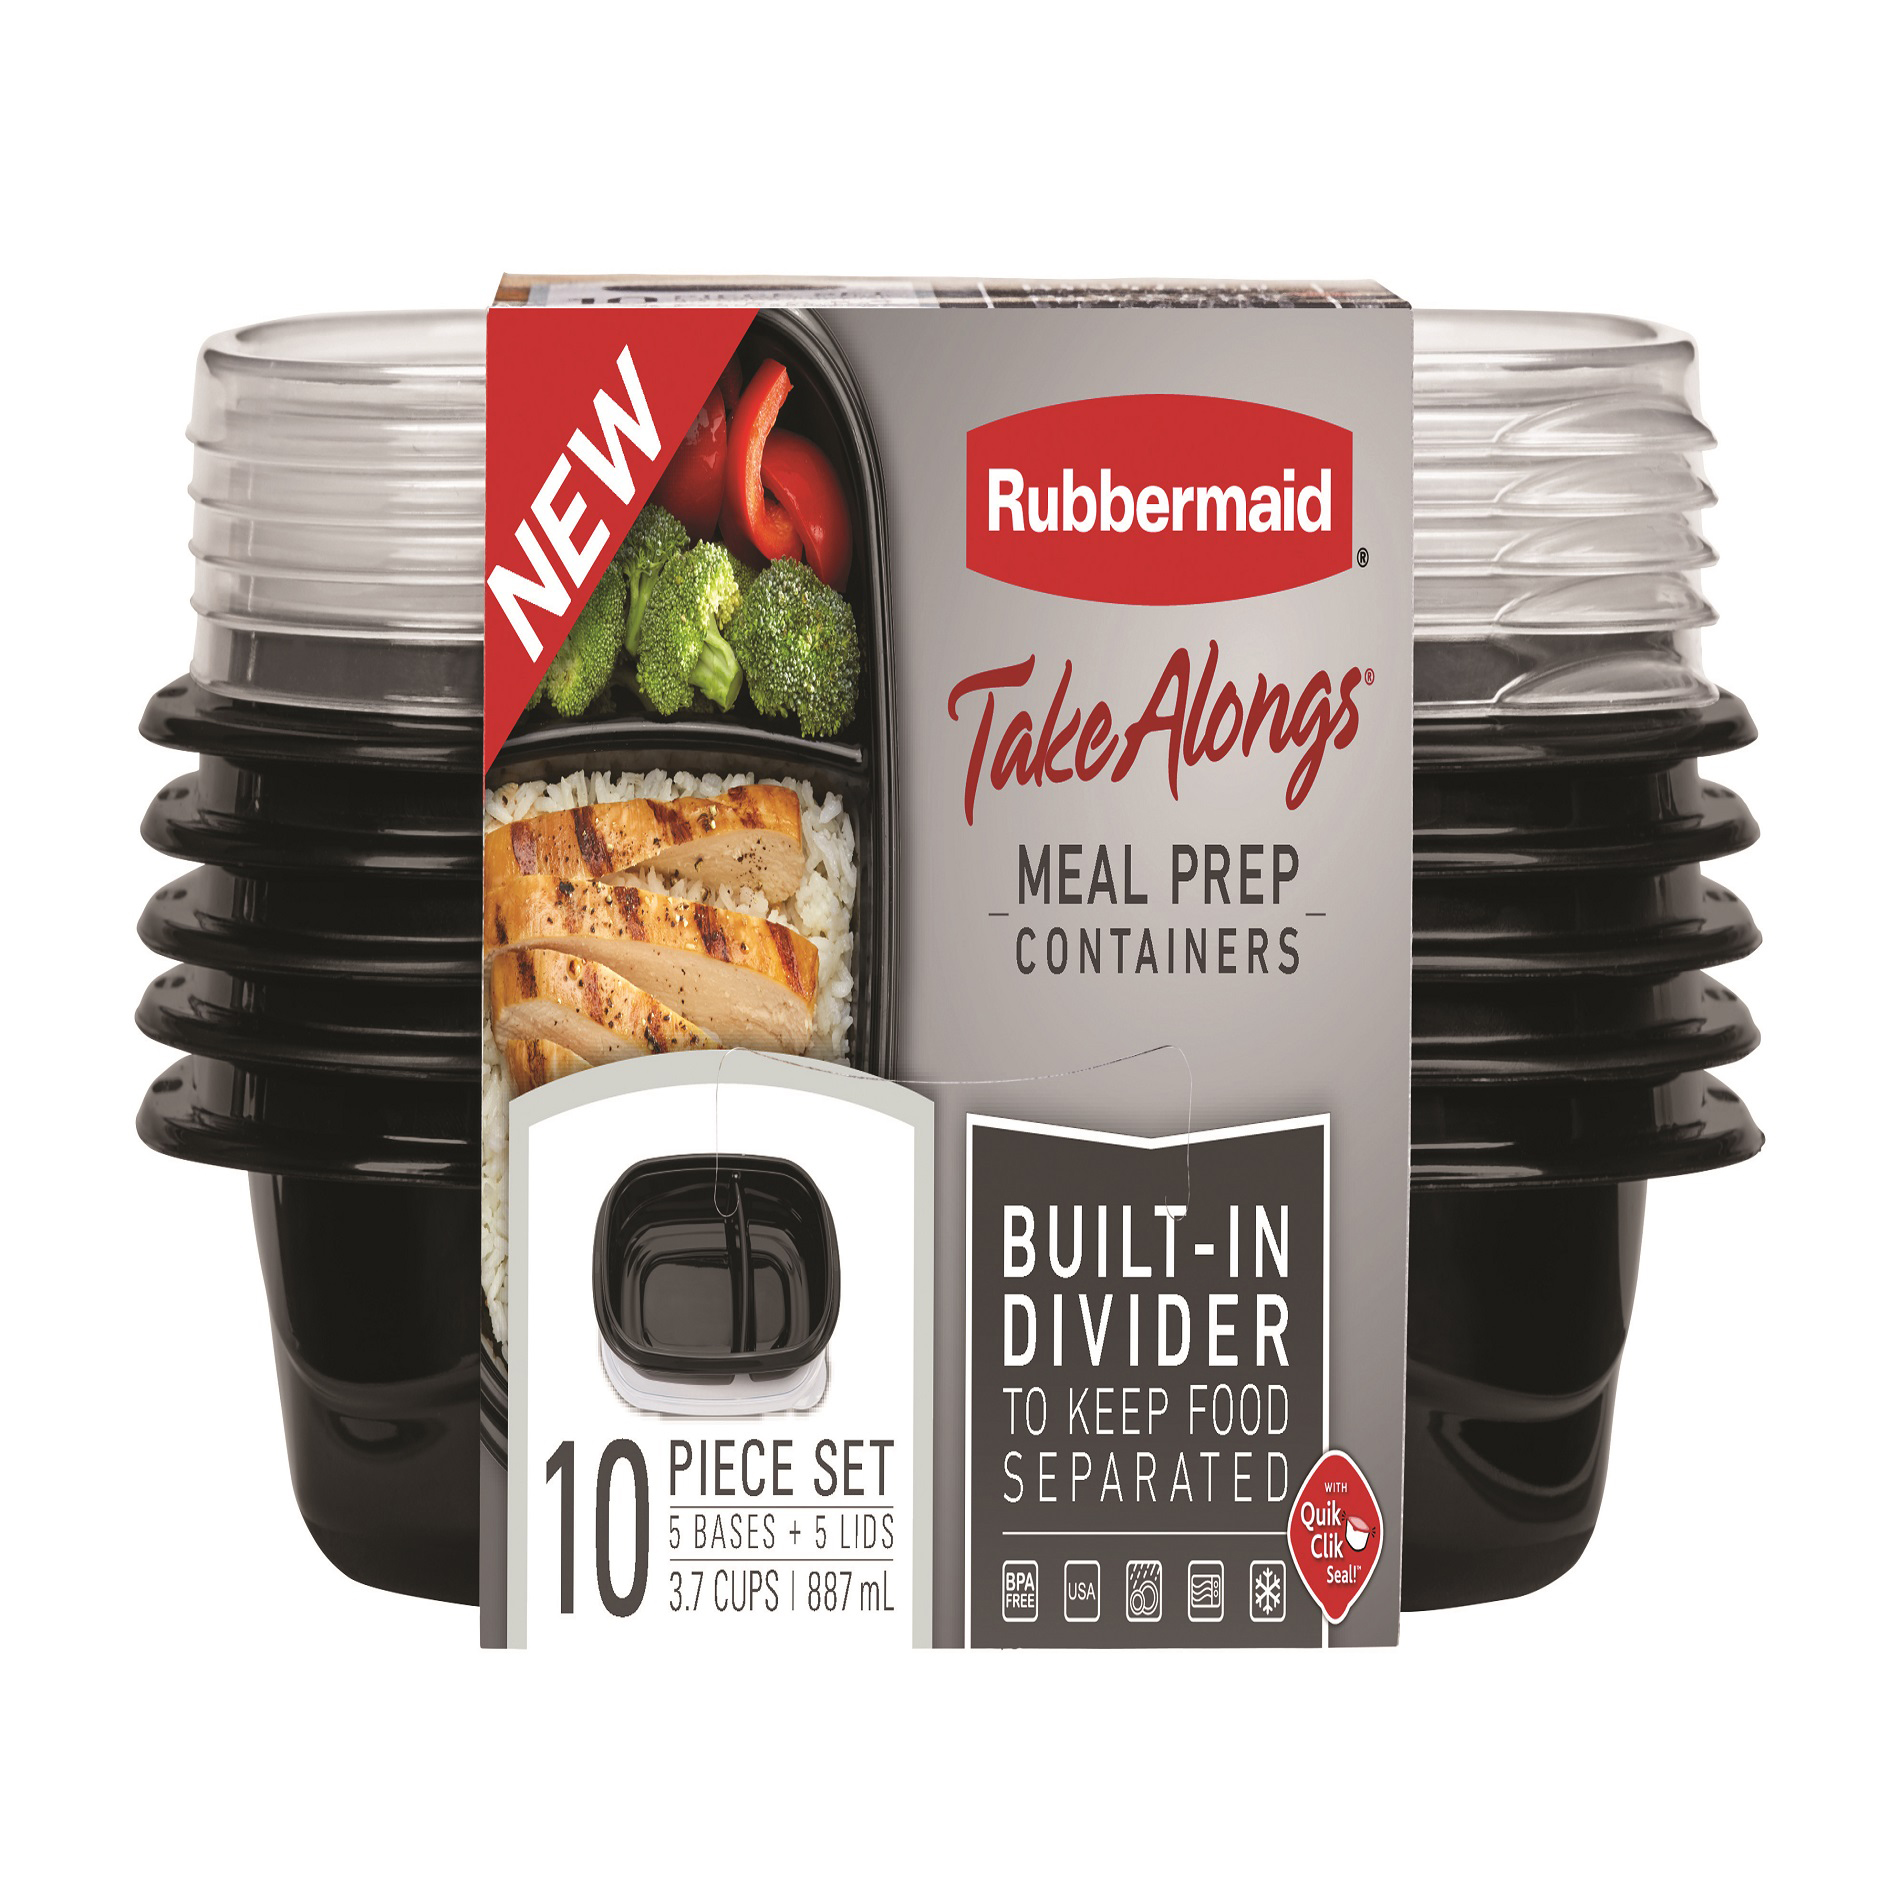 Rubbermaid Take Alongs 10 pc. Meal Prep Containers - Black